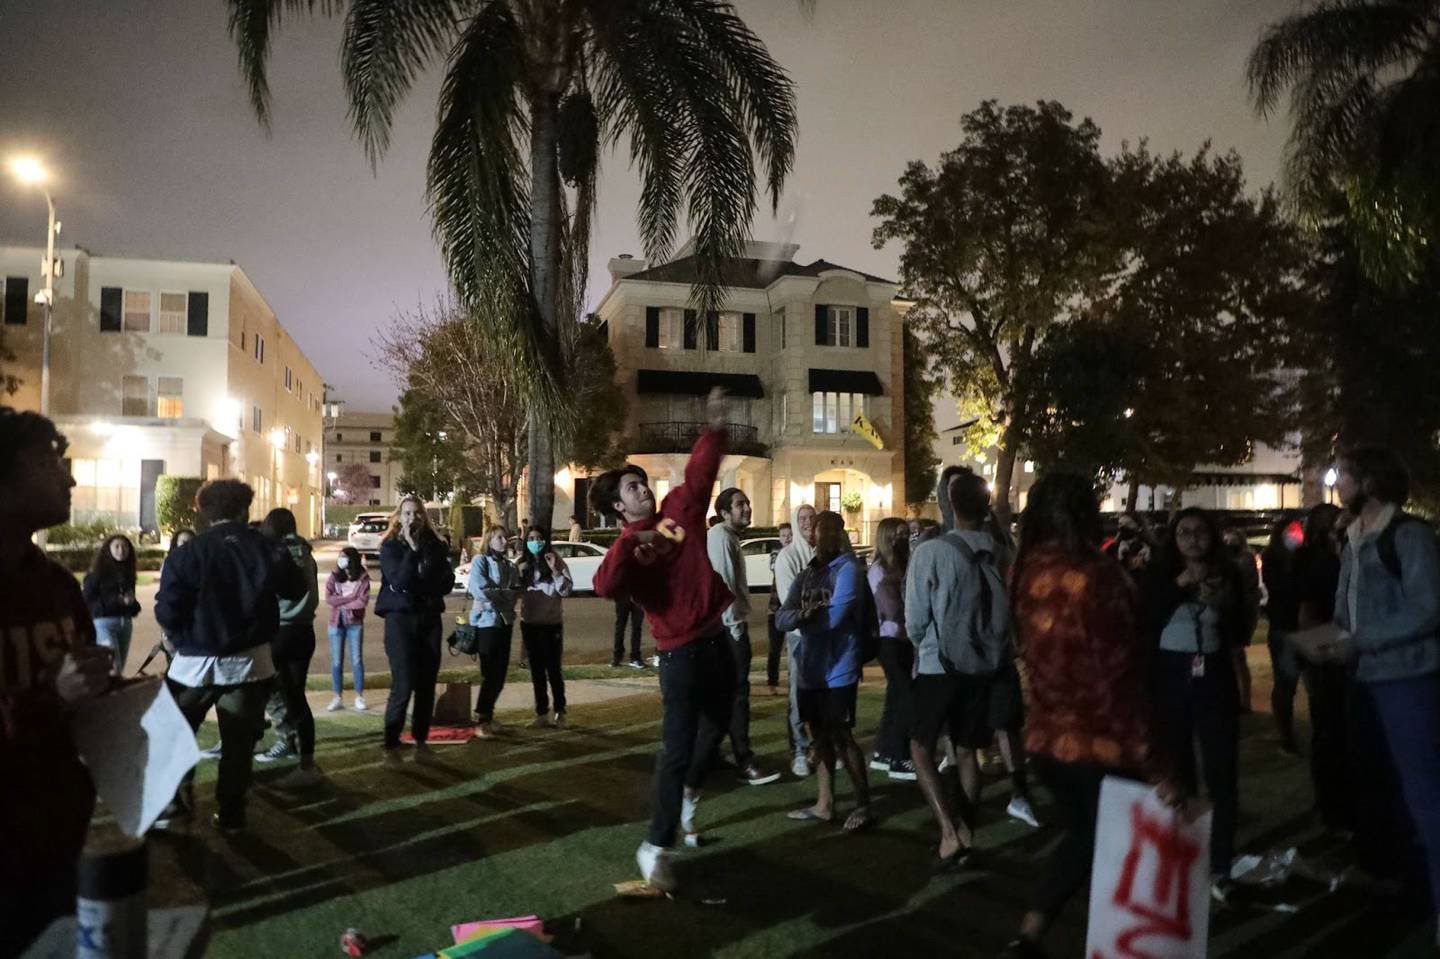  A USC student throws a plastic water bottle at the Sigma Nu house on October 22, 2021. Hundreds of students gathered outside of the house to protest numerous reports of sexual assault at the fraternity house. (Photo by Yannick Peterhans) 